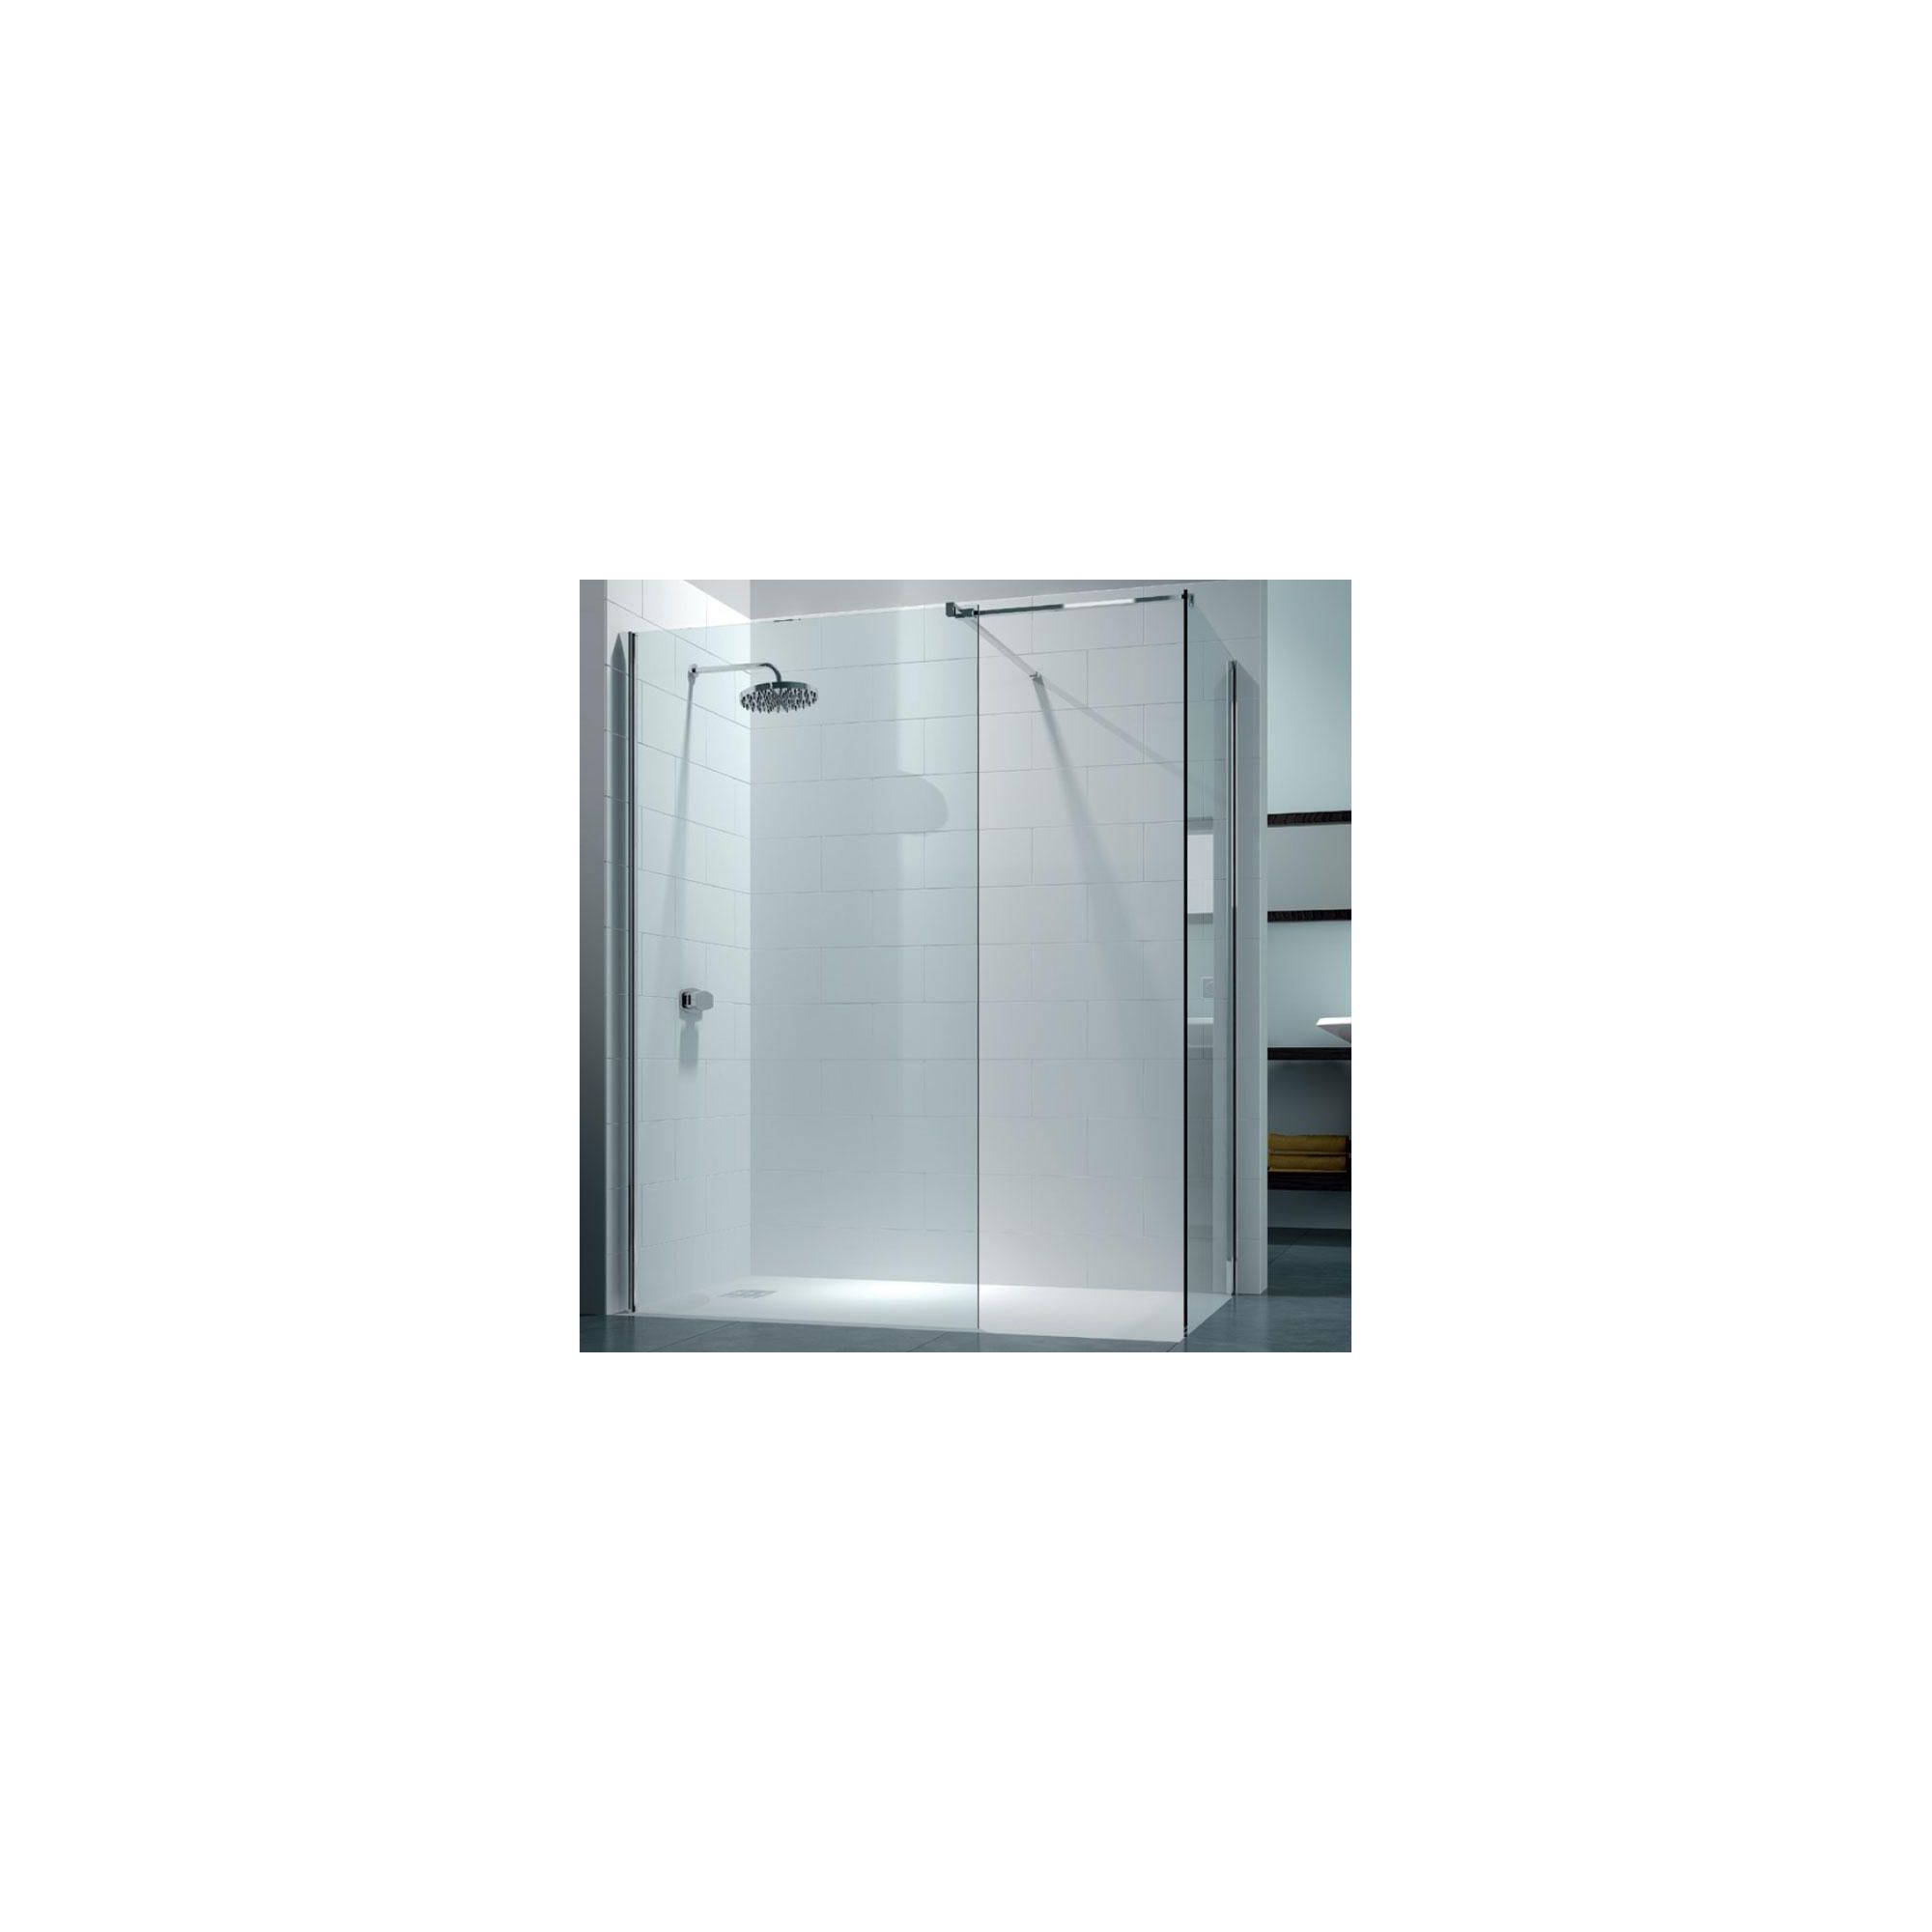 Merlyn Series 8 Walk-In Shower Enclosure, 1500mm x 900mm, 8mm Glass, excluding Tray at Tesco Direct